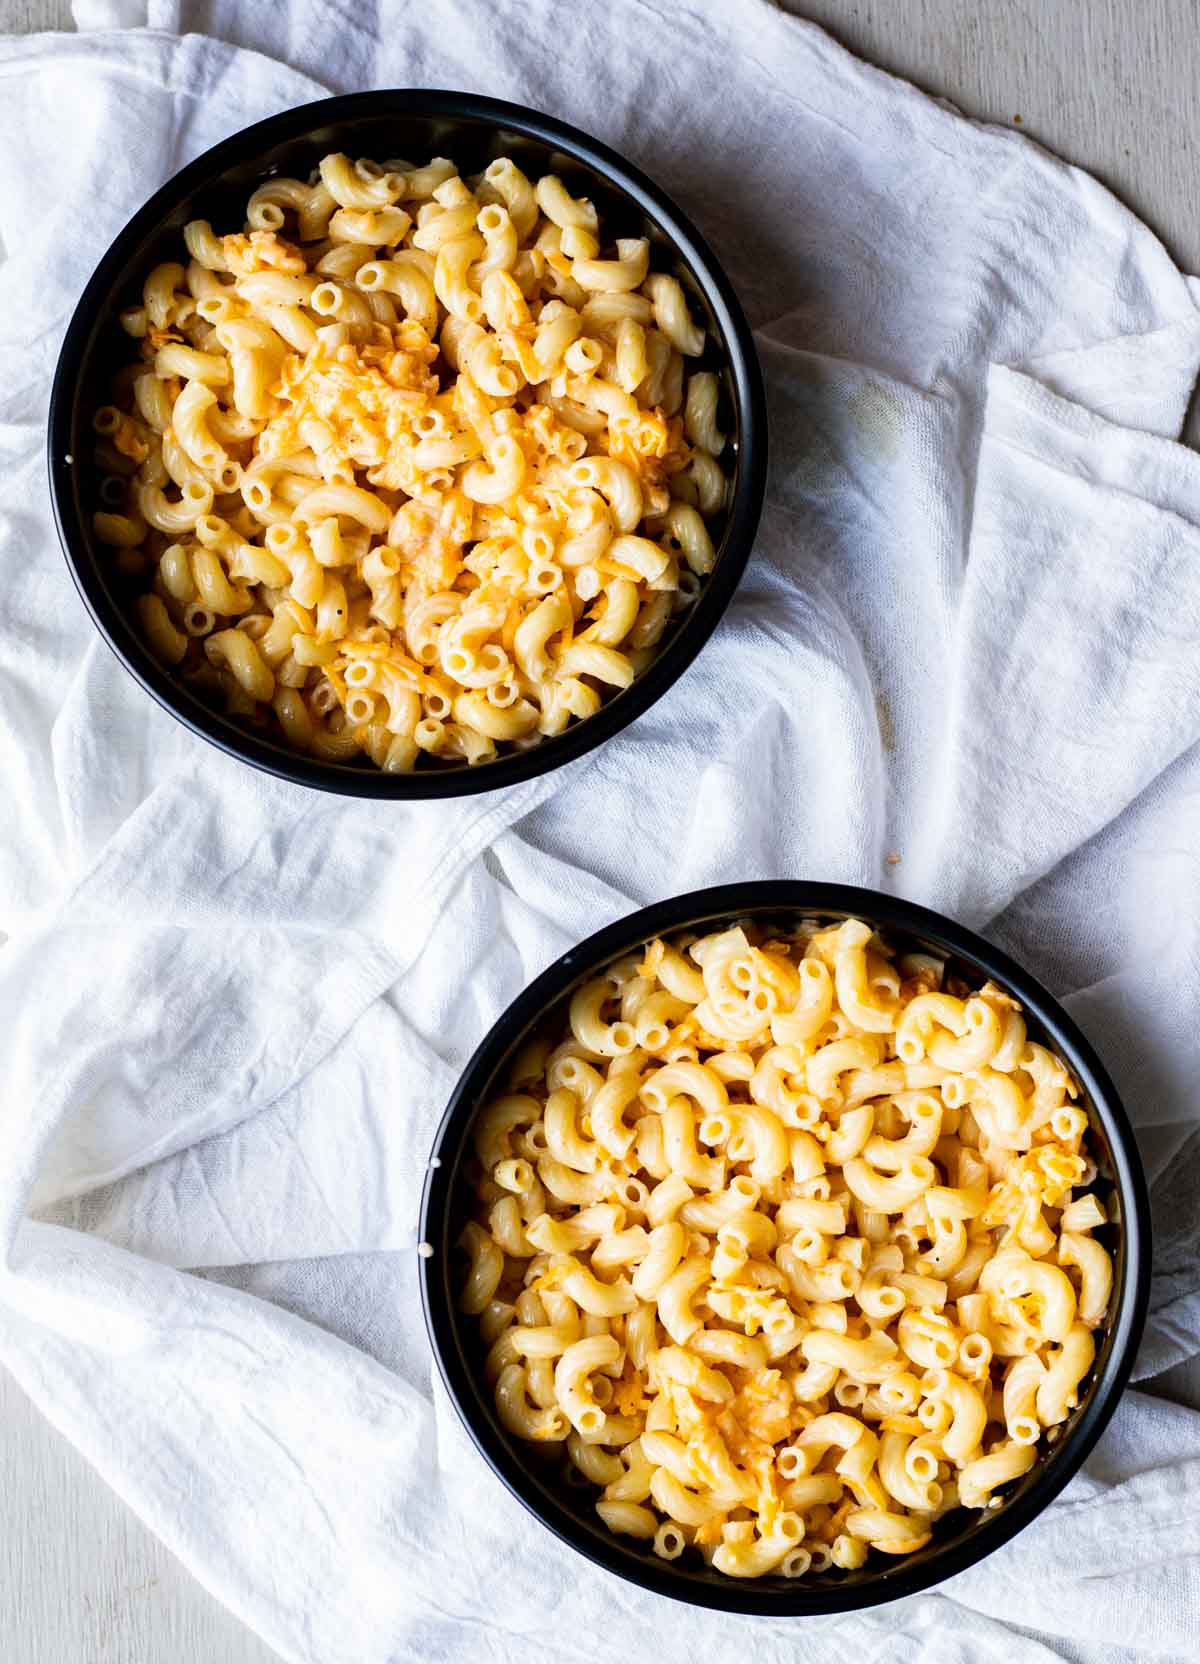 Mac and cheese mixture divided into two round pans.